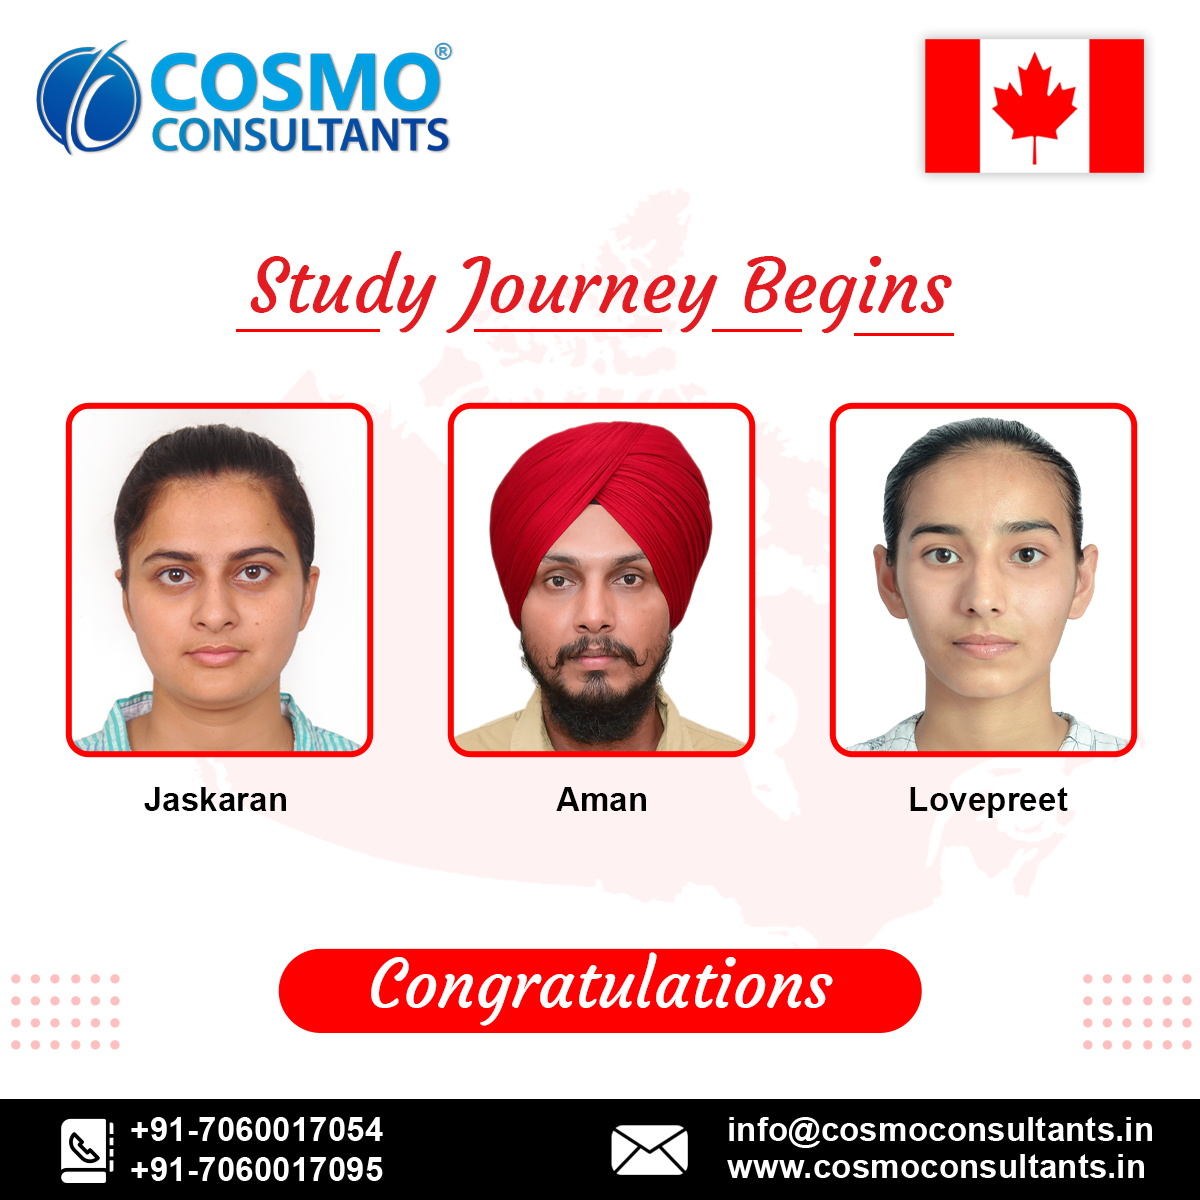 Team Cosmo Congratulates all these students and wishes them a Bright and Successful future.

For more information reach us: +91-7060017054, +91-7060017095.

#CosmoConsultants #Canada #StudyInCanada #StudyAbroad #studentvisa #studyvisa #canadavisa #education #canadaimmigration